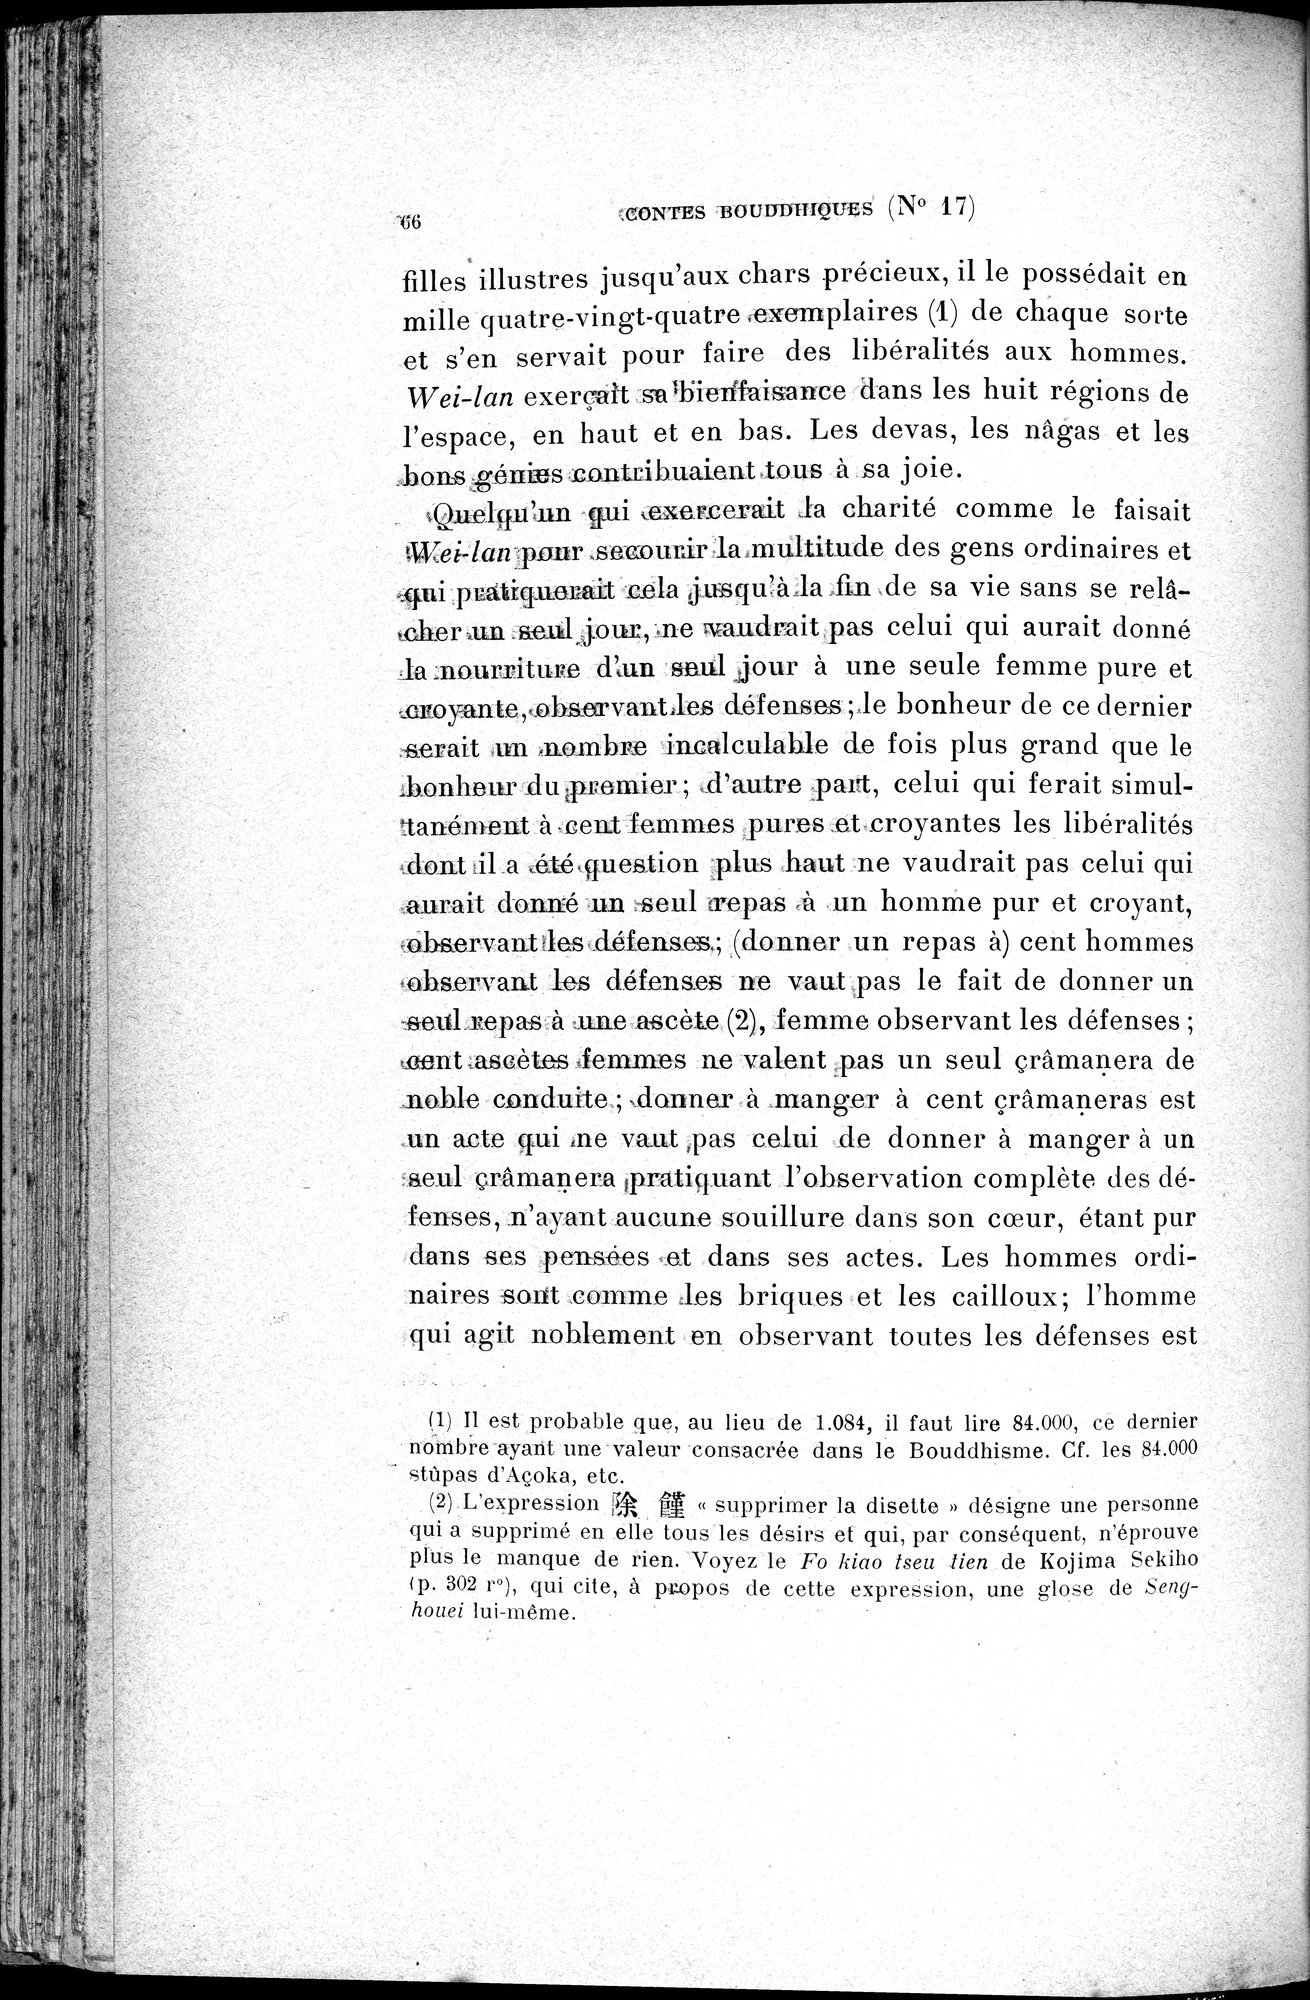 Cinq Cents Contes et Apologues : vol.1 / Page 100 (Grayscale High Resolution Image)